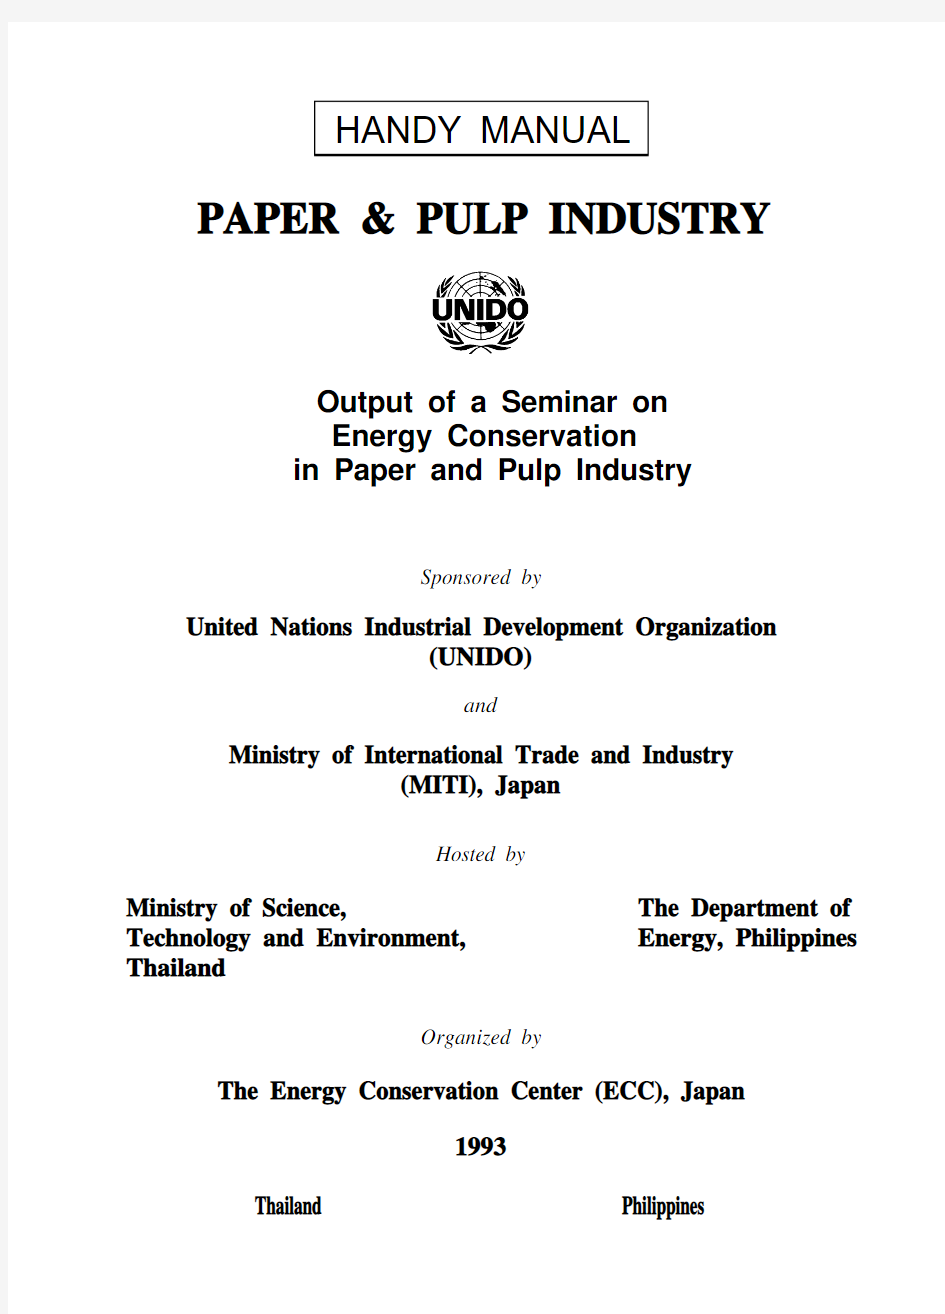 Energy Conservation in Pulp and Paper Industry